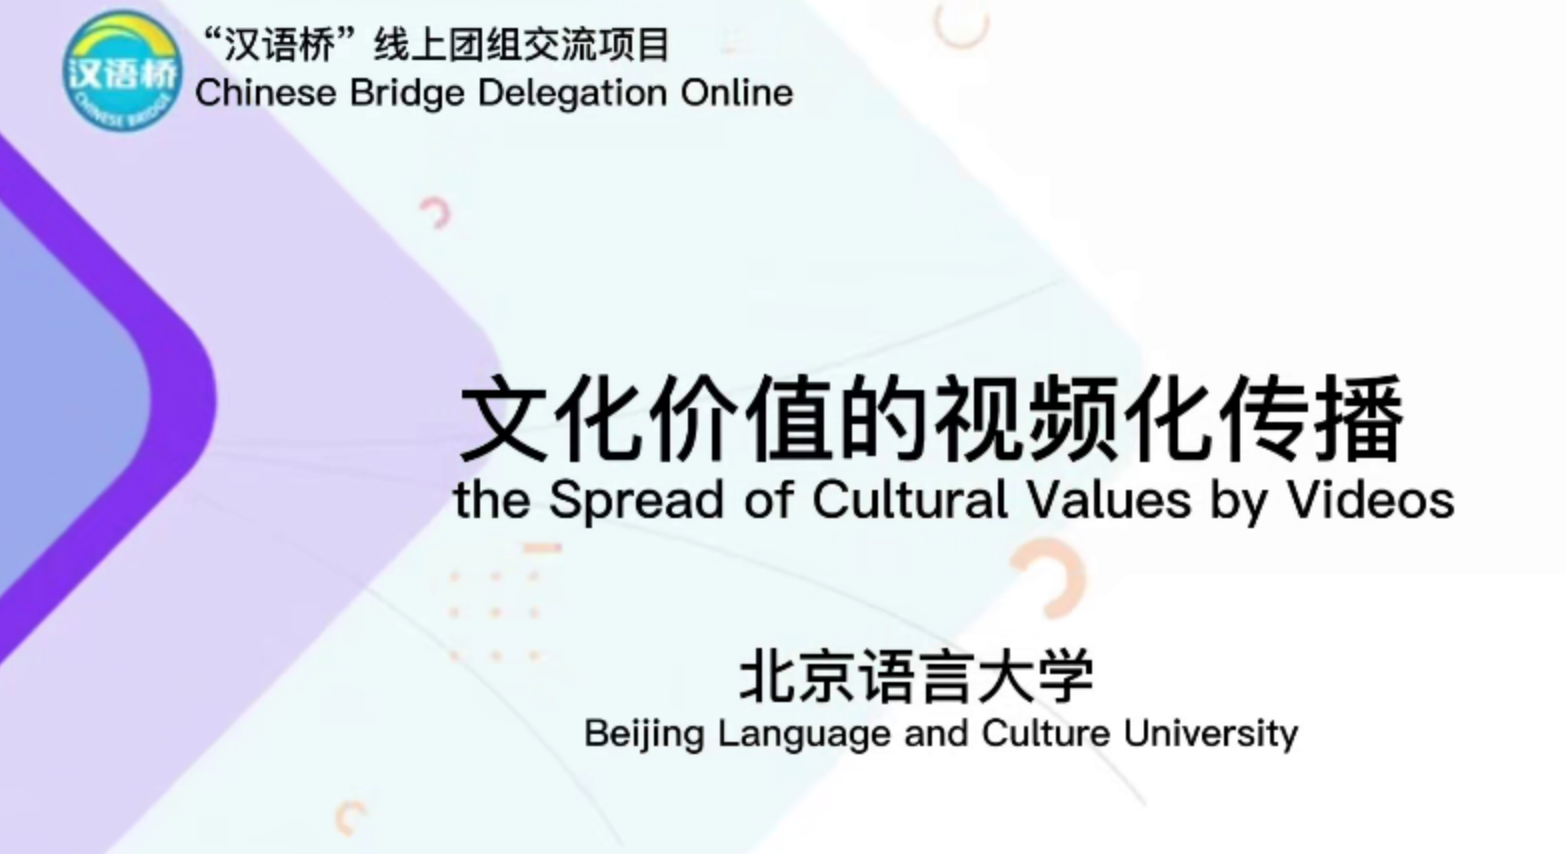 the Spread of Cultural Values by Videos